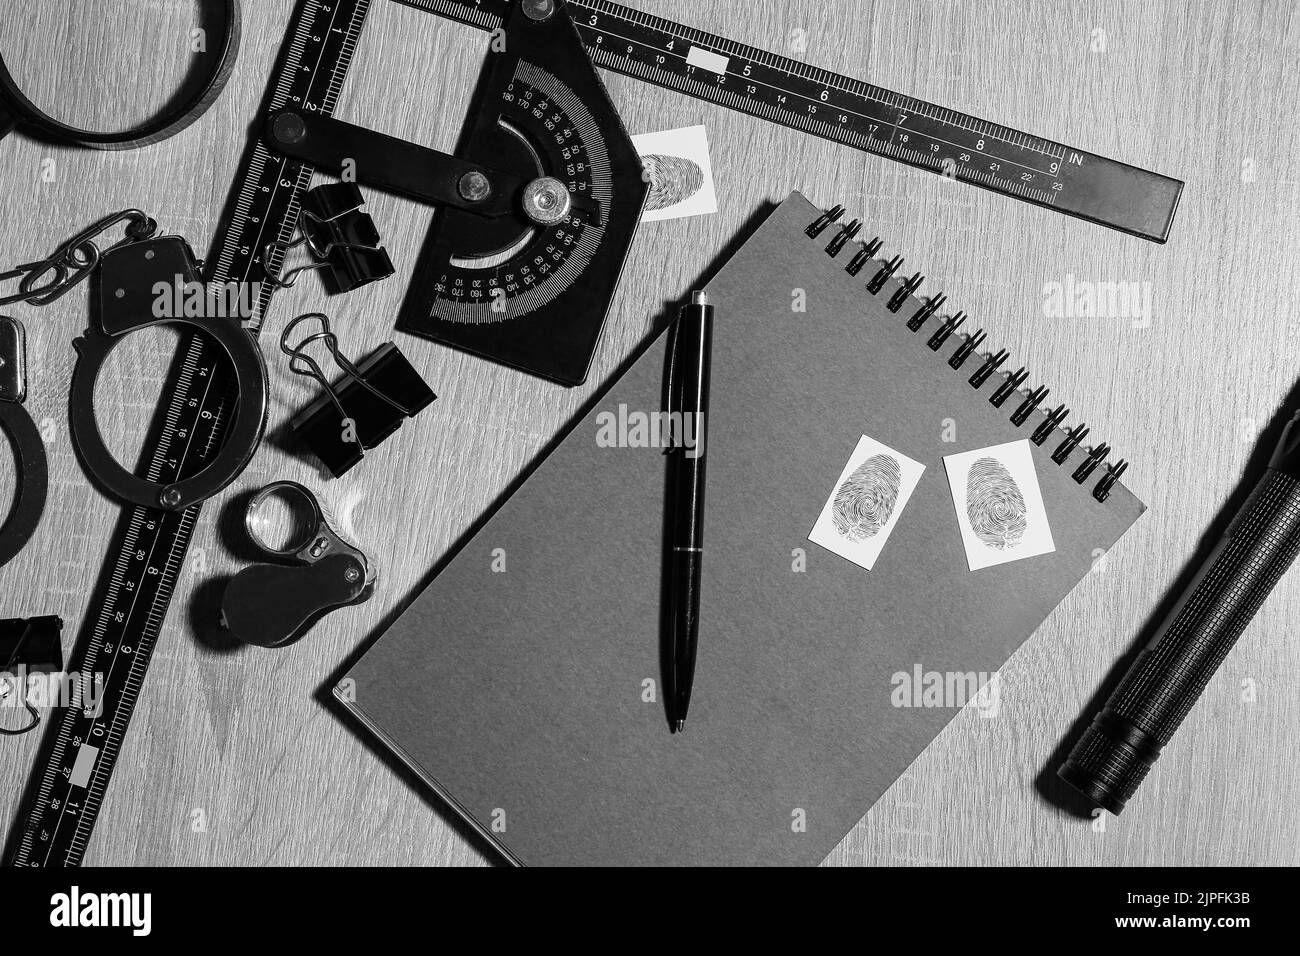 Notebook and accessories of FBI agent on wooden background Stock Photo